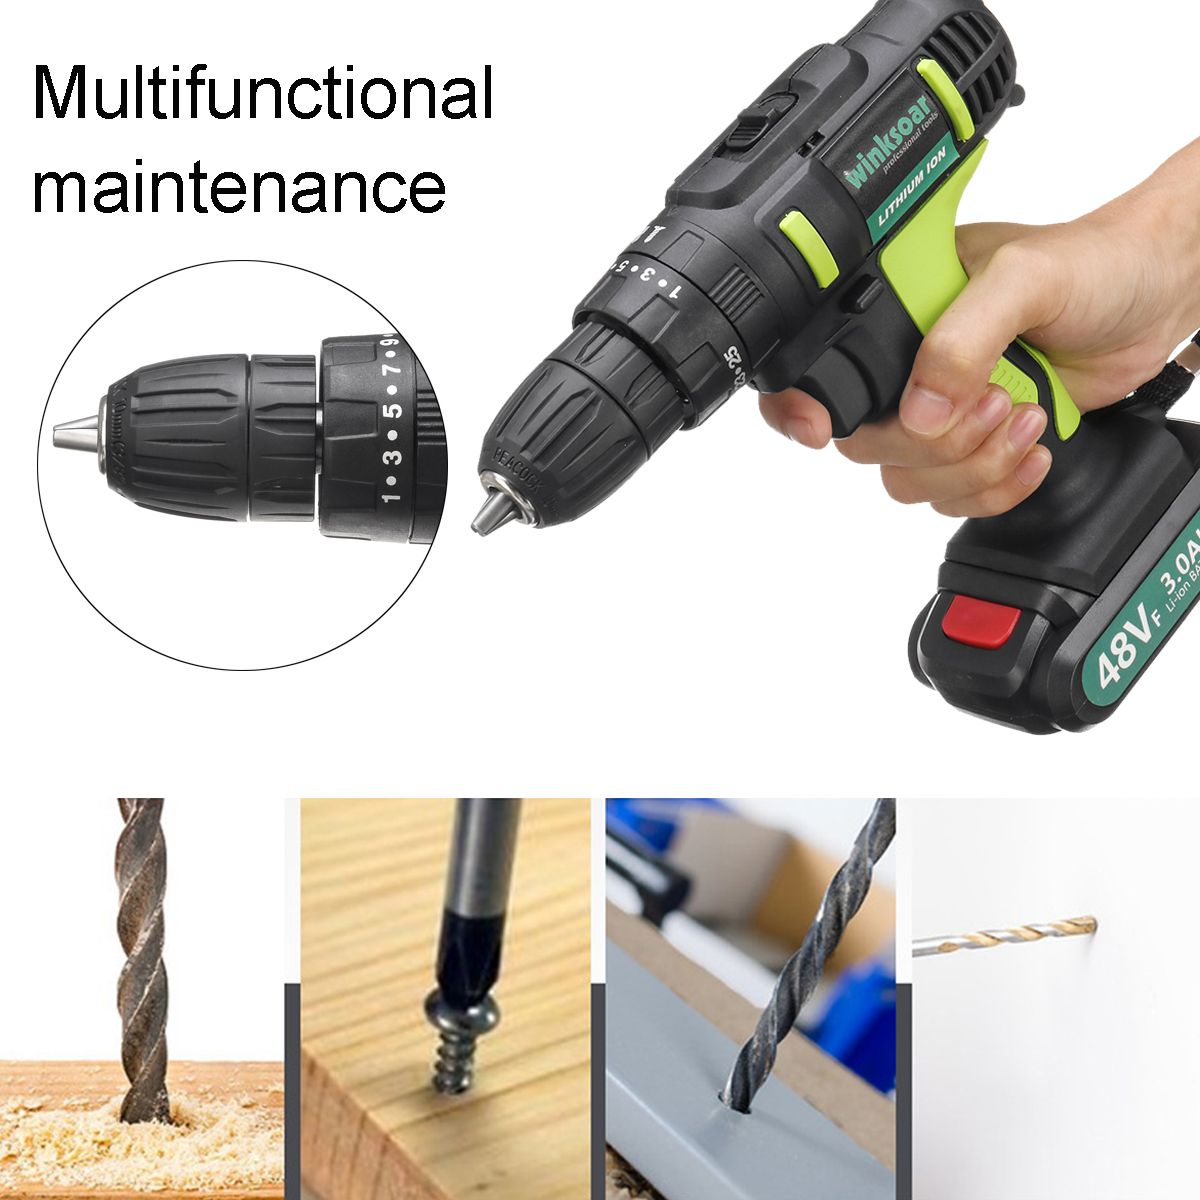 48VF-30Ah-3-In-1-Rechargable-Electric-Screwdriver-Power-Driver-Drilling-Power-Tools-251-Gear-1494842